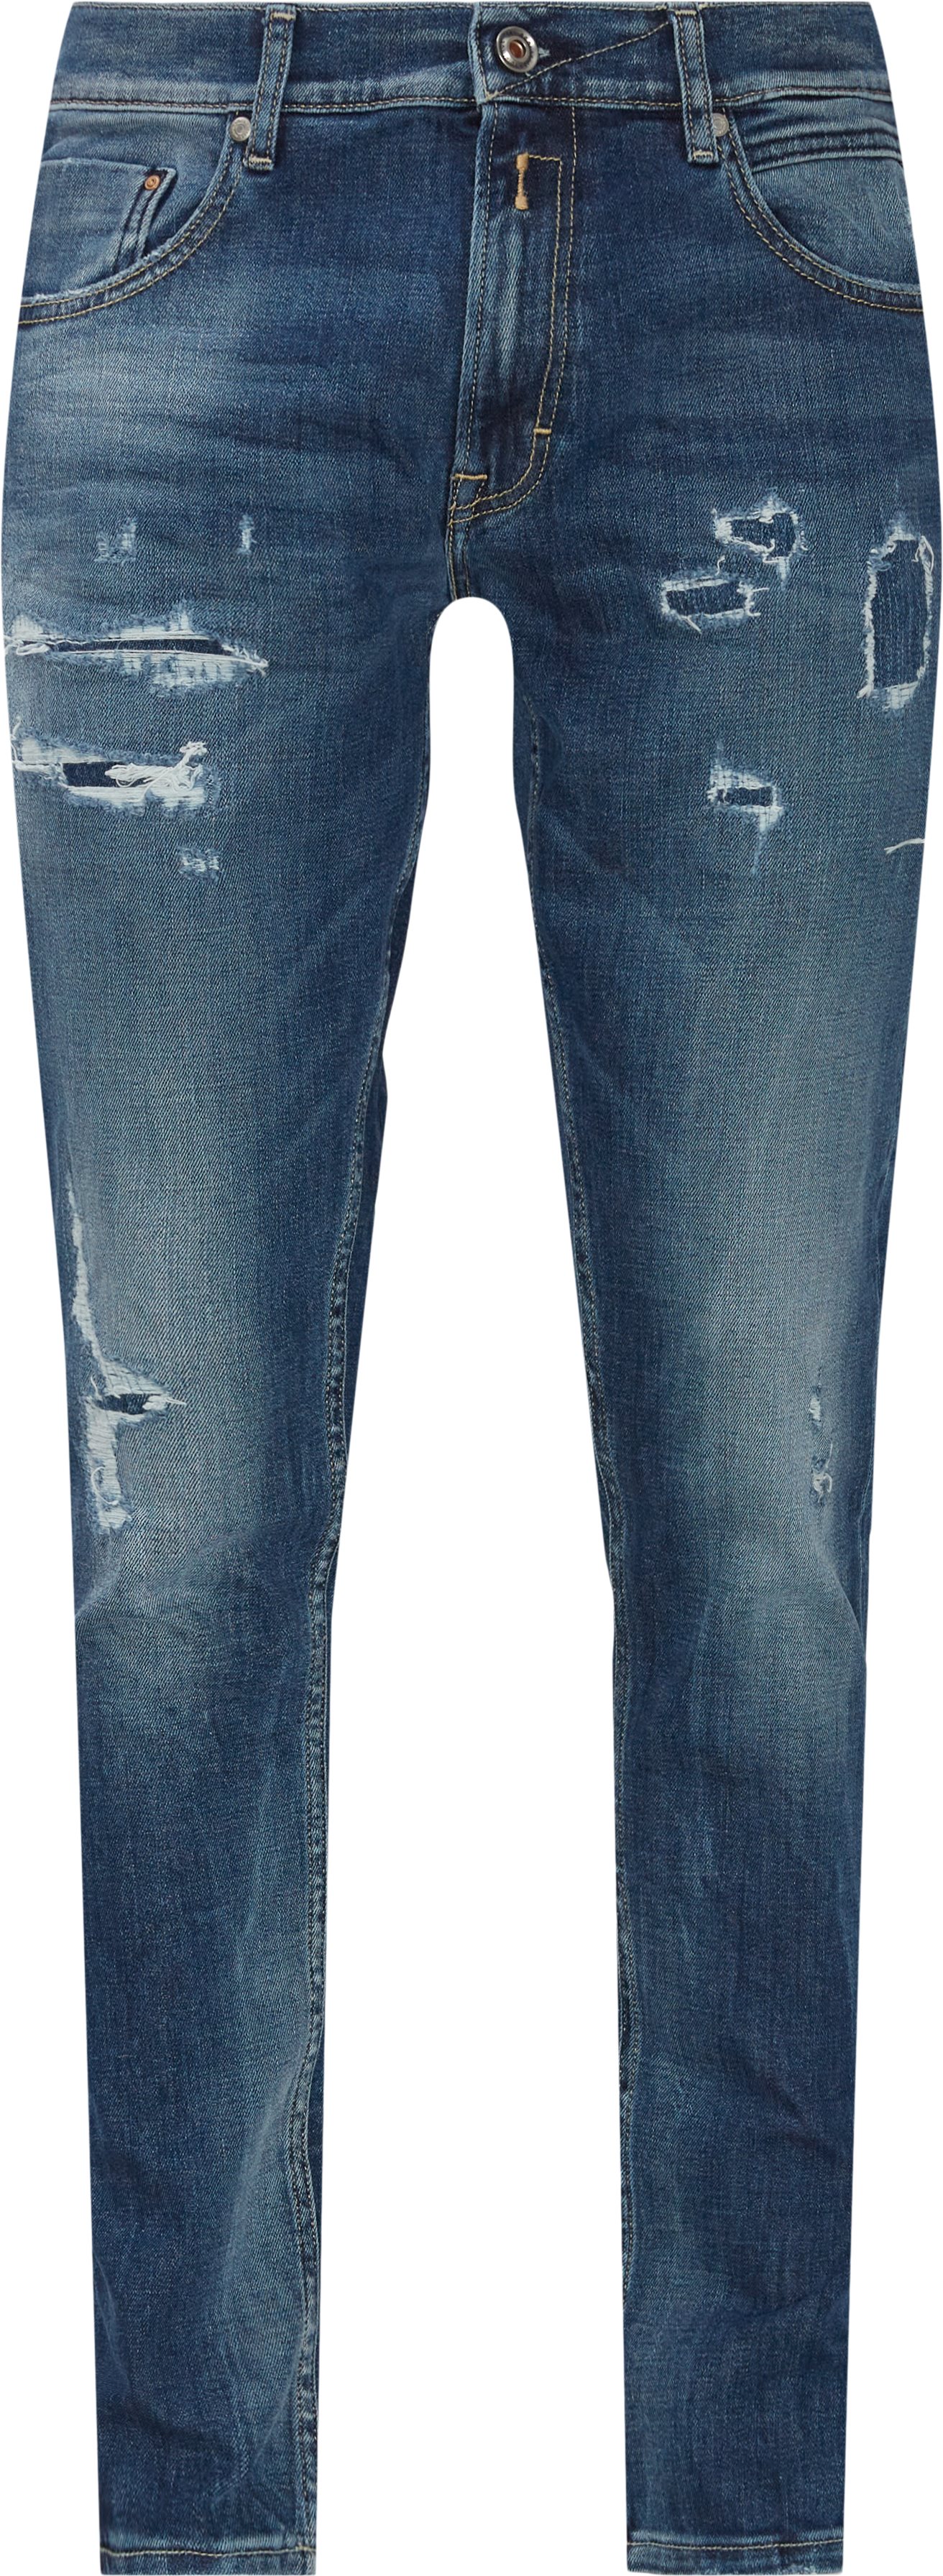 Straight jeans Replay Blue size 28 US in Denim - Jeans - 26592364